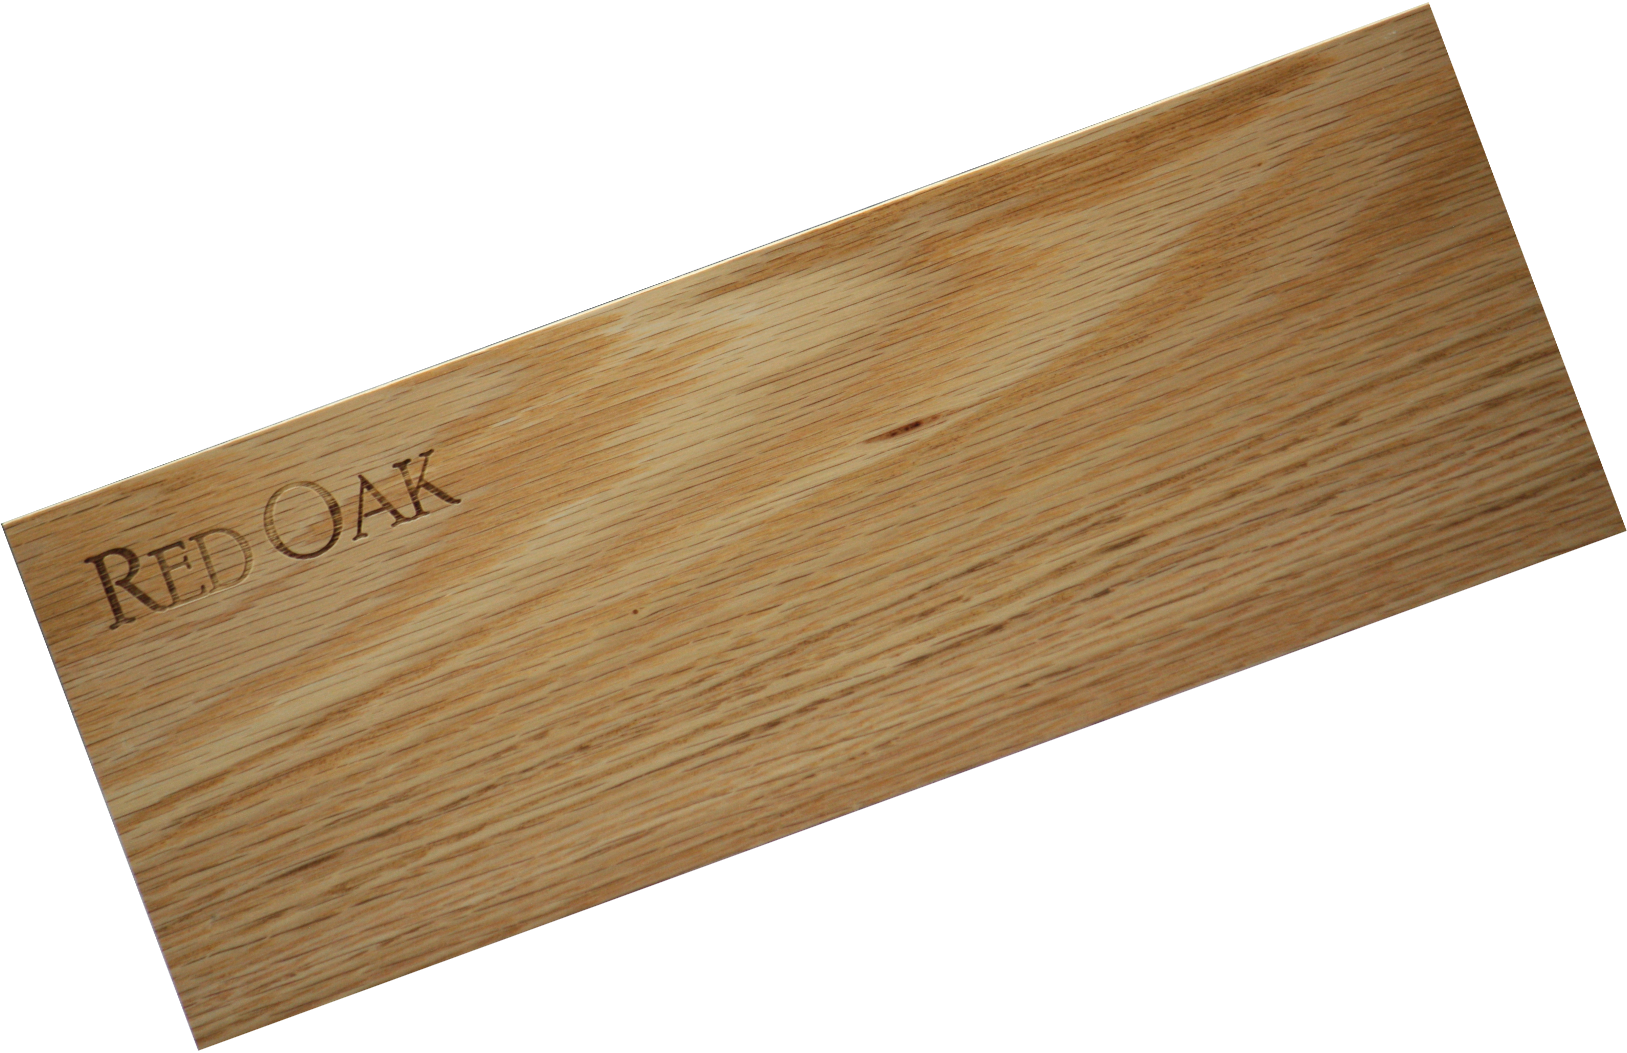 Wood Strip (Red Oak / Hickory) 6" x 14" x  (3/32", 1/8", 3/16" or 1/4") 